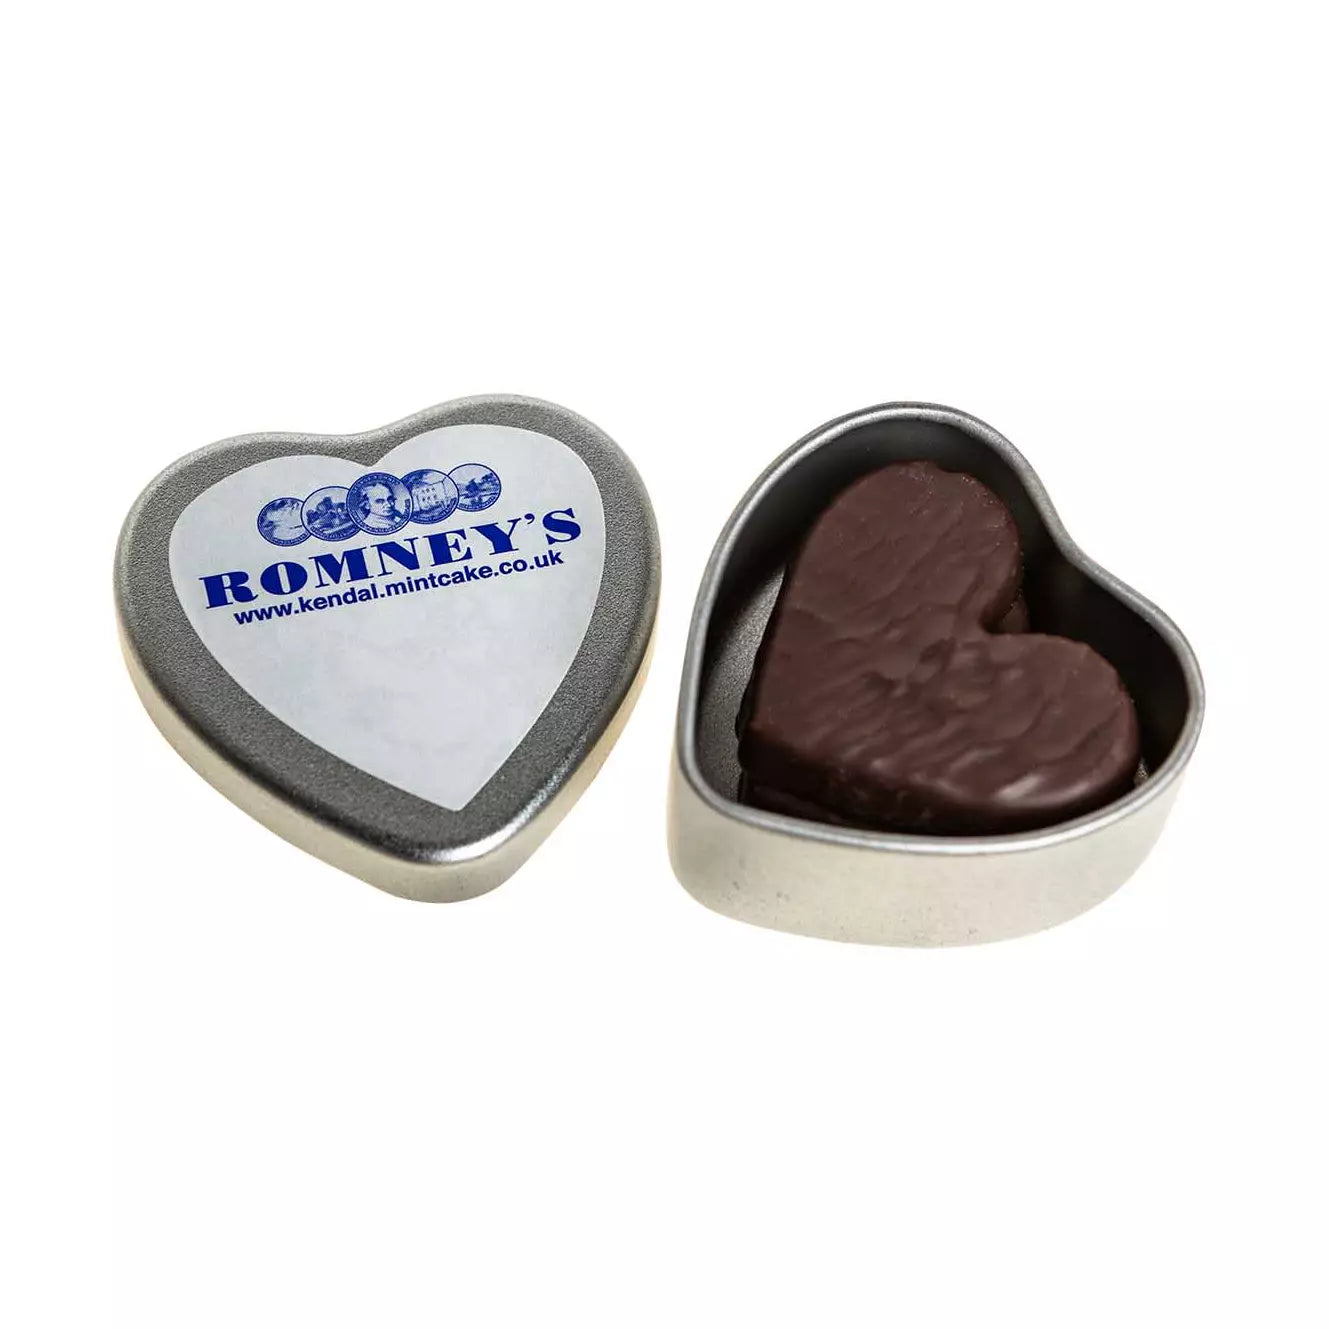 A heart shaped tin is open on the right of the image and contains a heart shaped chocolate coated Kendal Mint Cake. The lid is to the right of the image and has a white heart shaped sticker on it featuring the text 'Romney's'. the website URL & Romney's logos in a blue font.